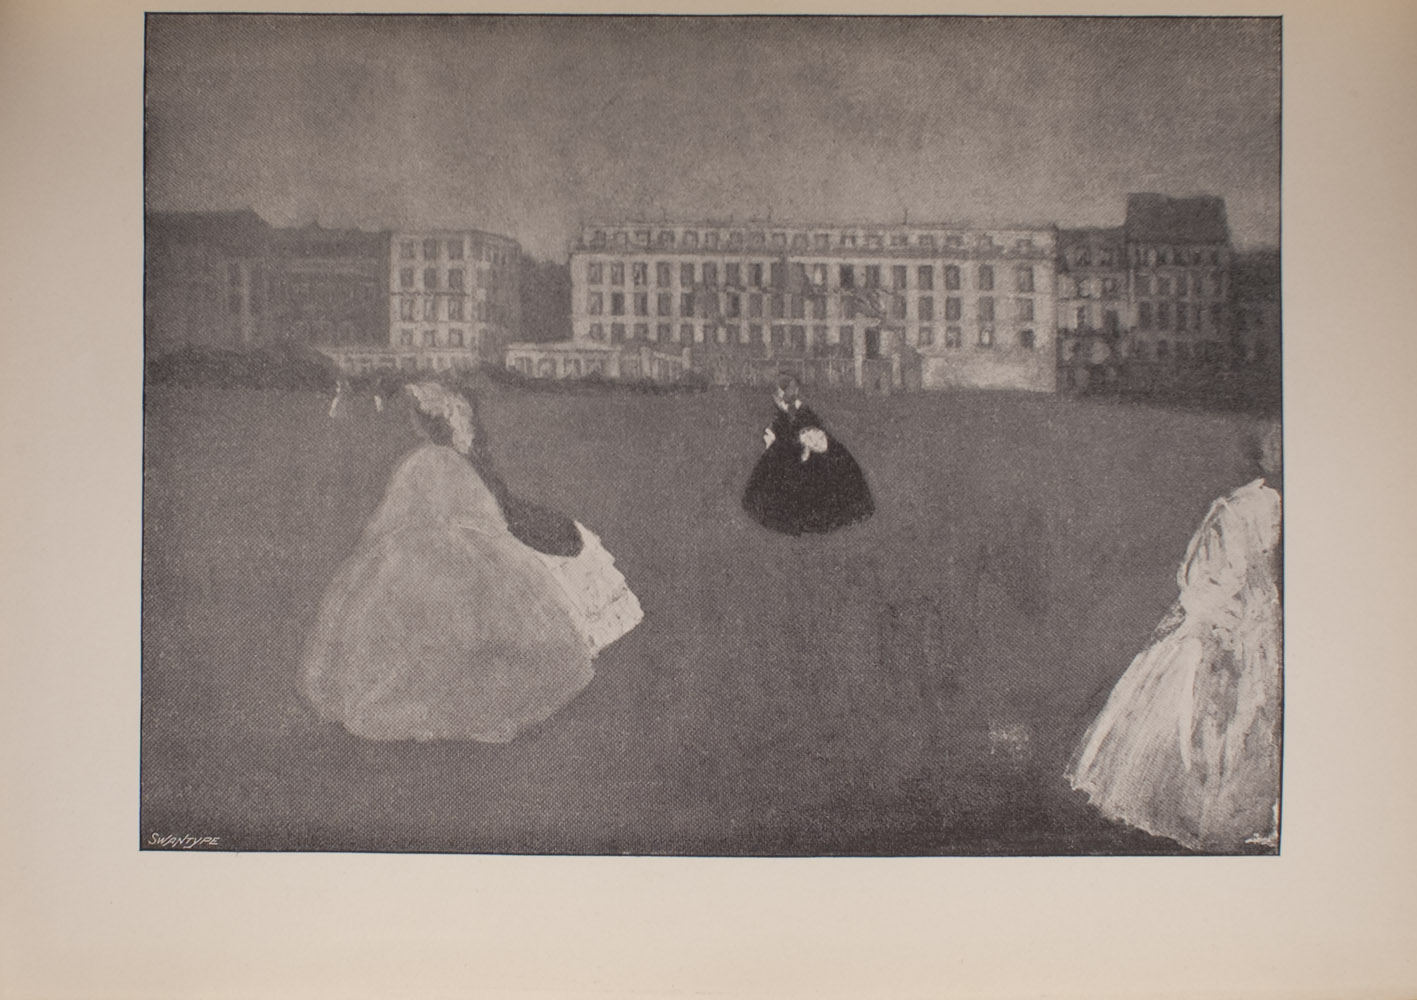 Image is of women walking in the foreground and middle ground both alone and in pairs In the background there is a series of buildings with many windows The women are wearing long full skirts The image is displayed horizontally